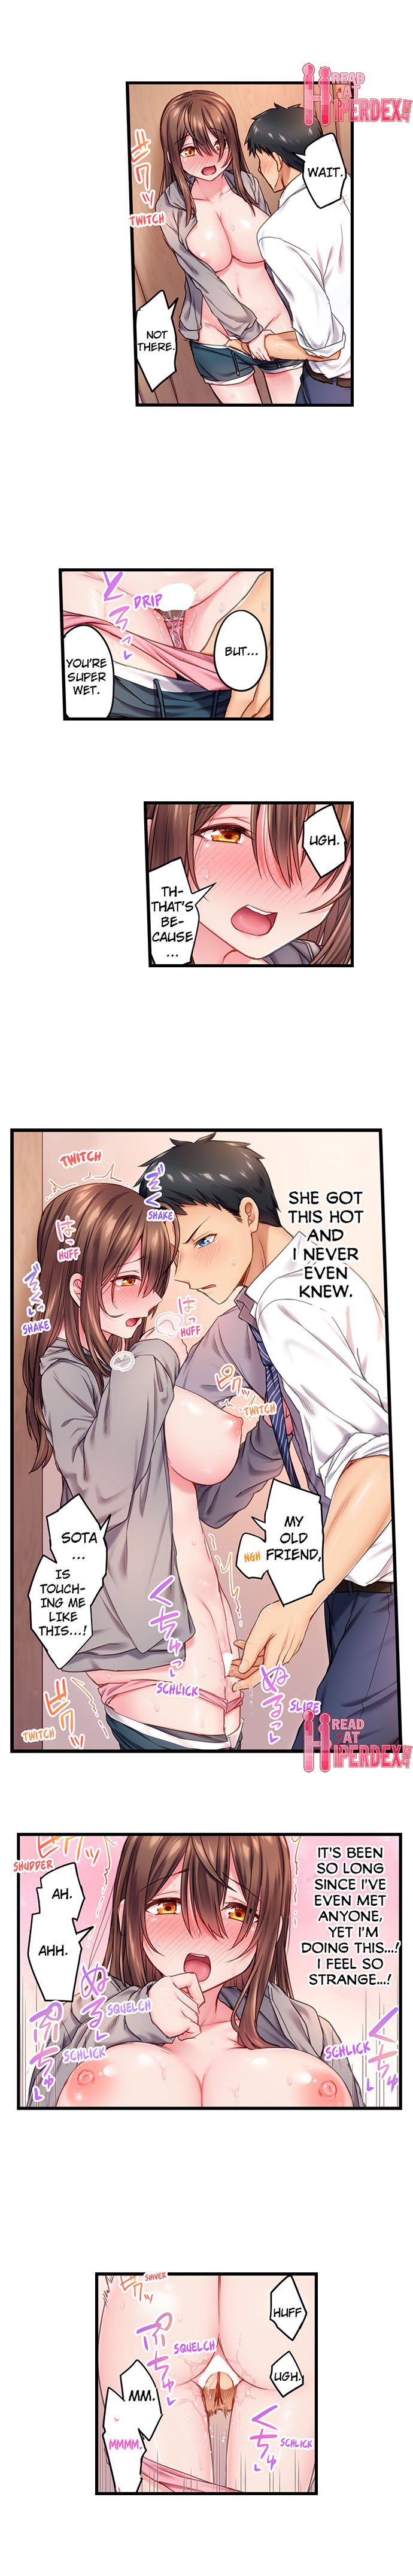 Can’t Believe My Loner Childhood Friend Became This Sexy Girl - Chapter 3 Page 4